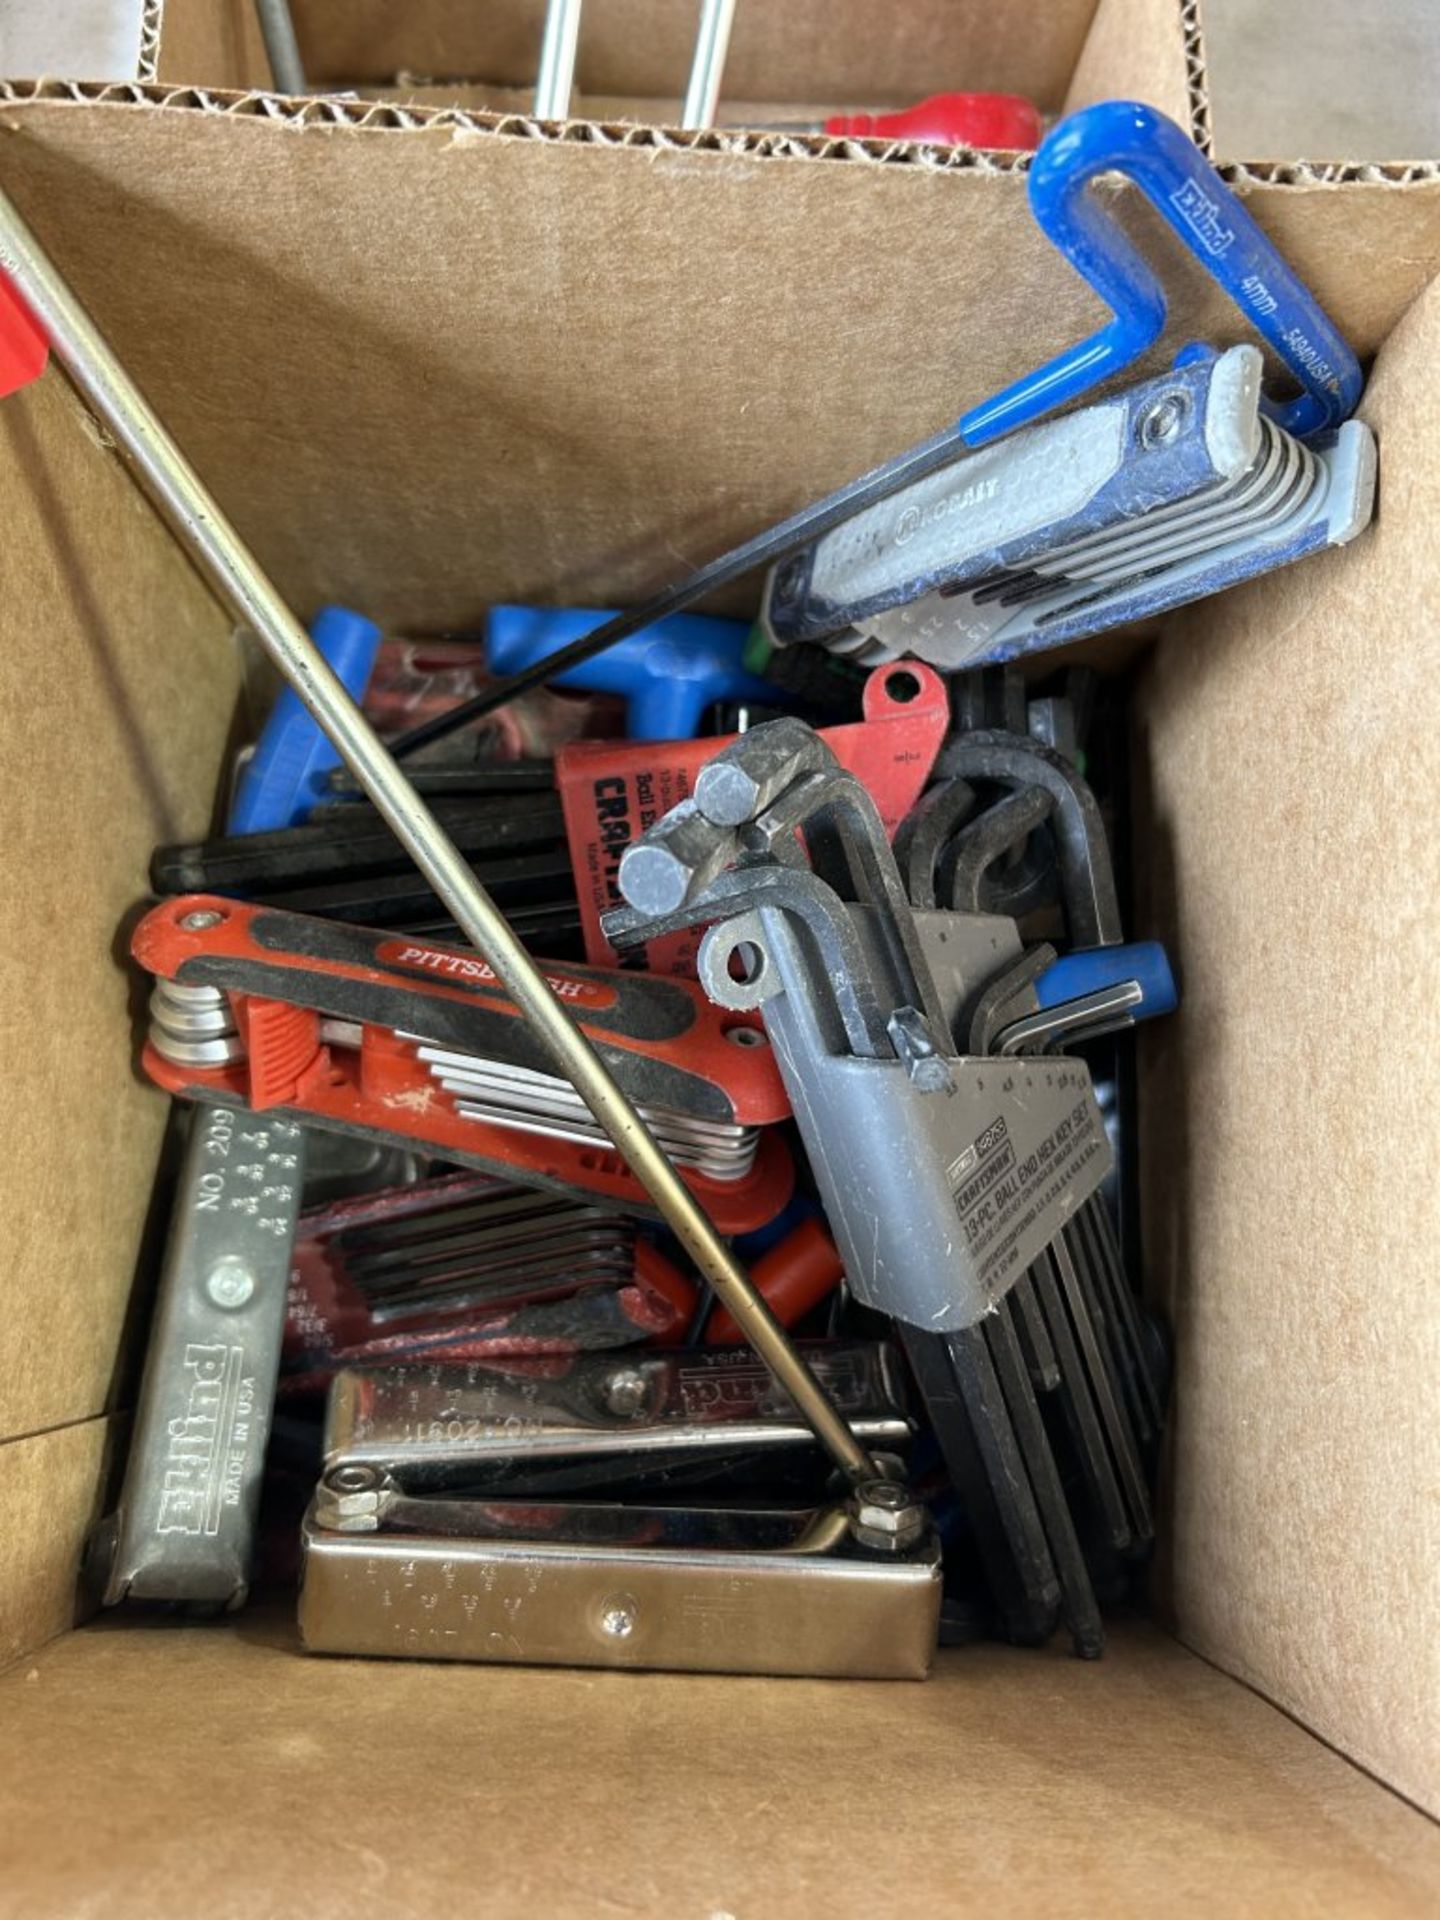 ASSORTED ALLEN WRENCHES, SCREWDRIVERS, DOWELING JIG, ETC. - Image 2 of 7